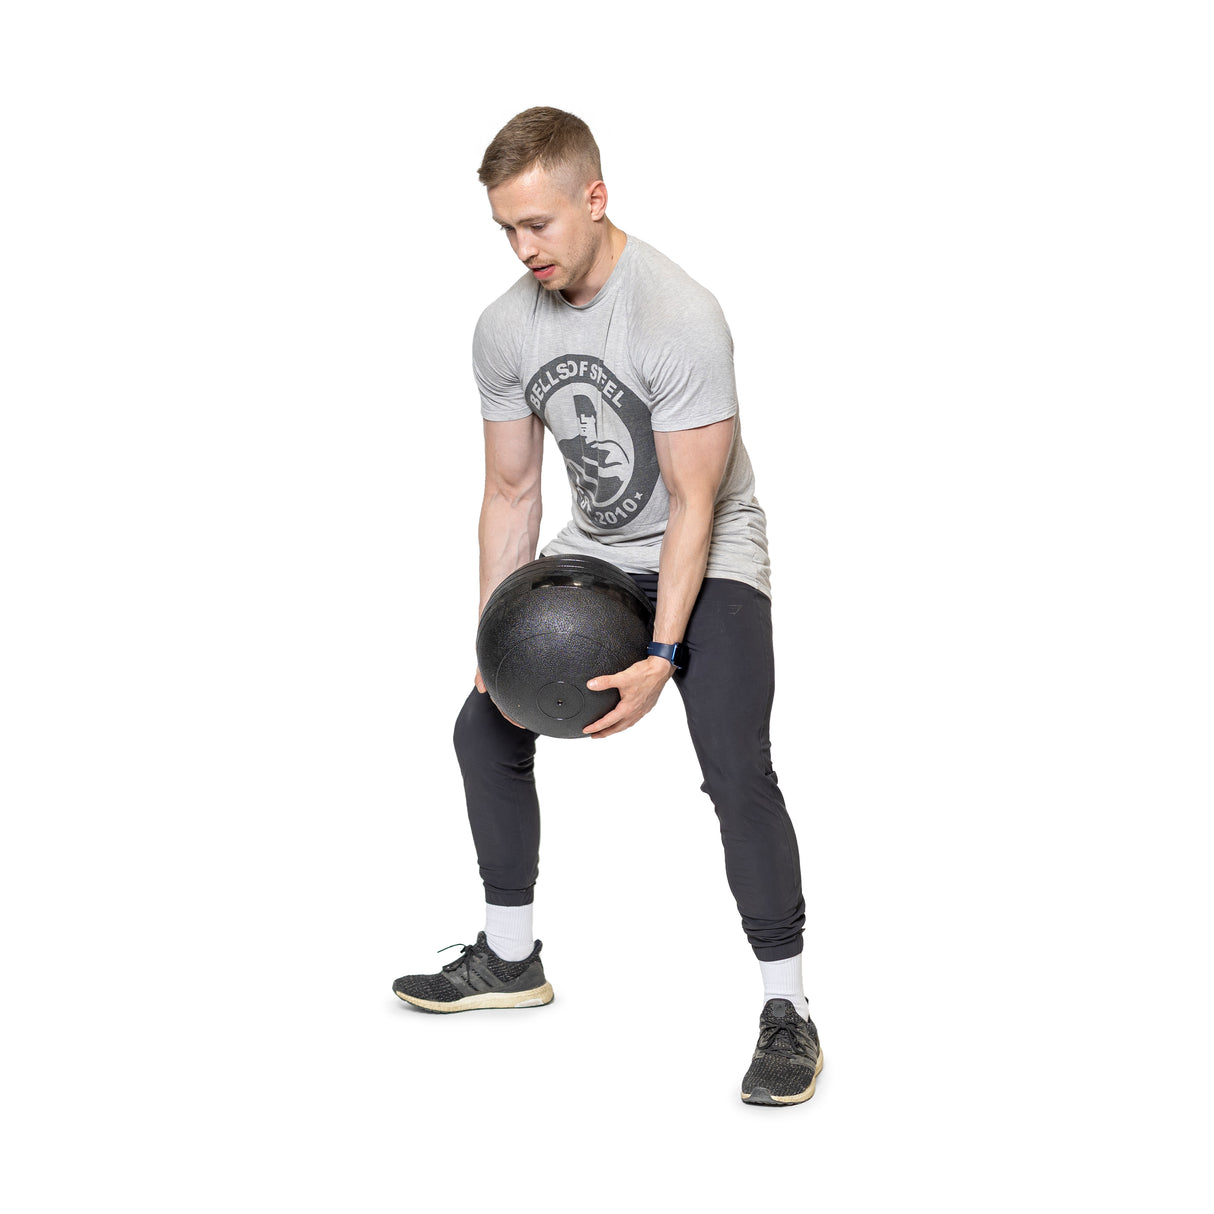 Man performing exercises with slam balls.